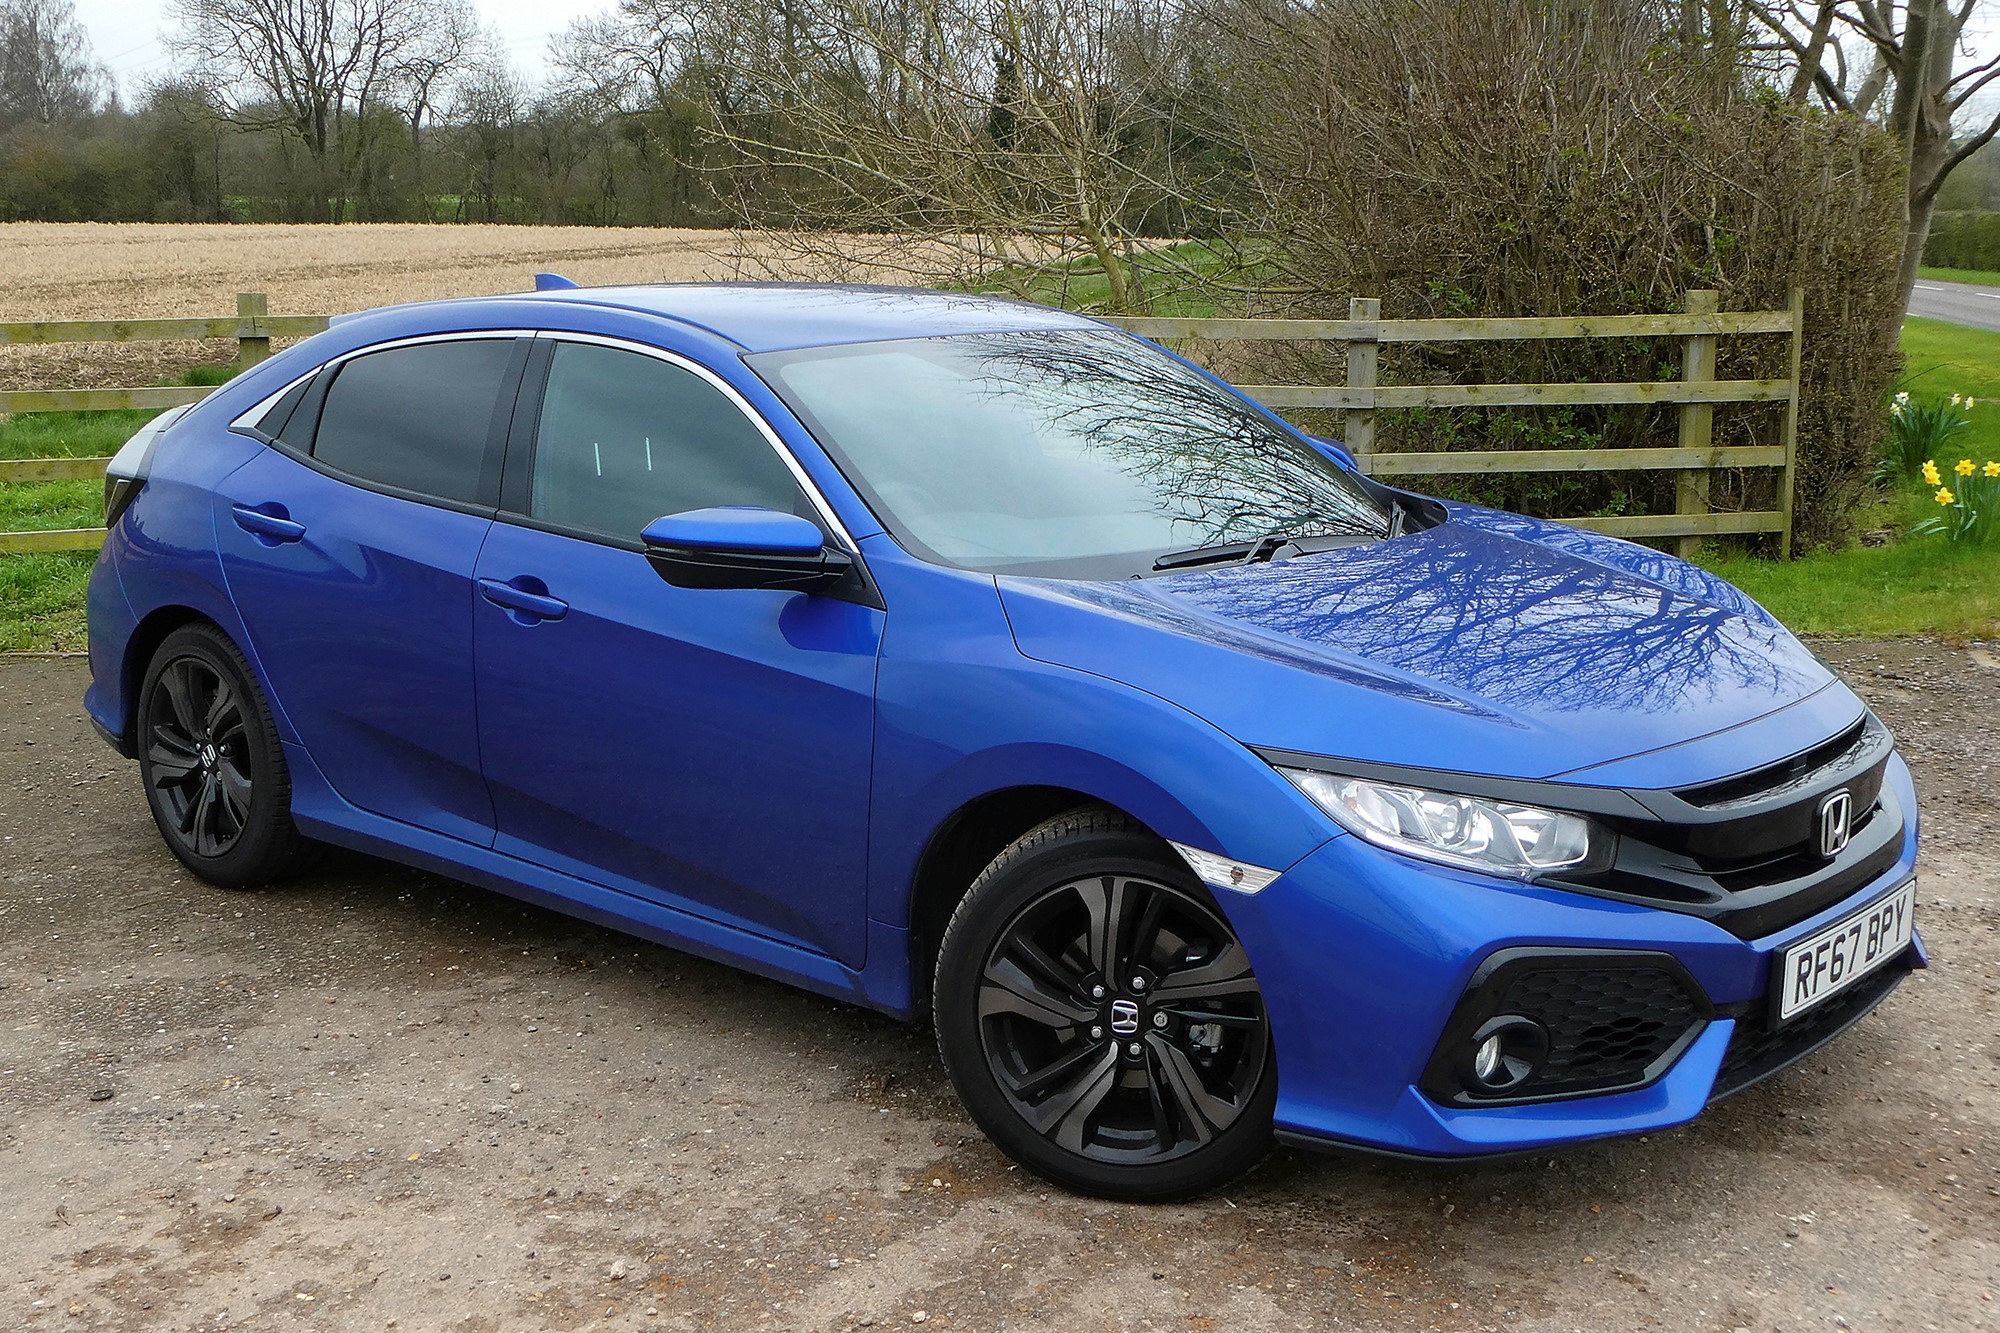 Honda Civic How The Latest Model Was Reborn General